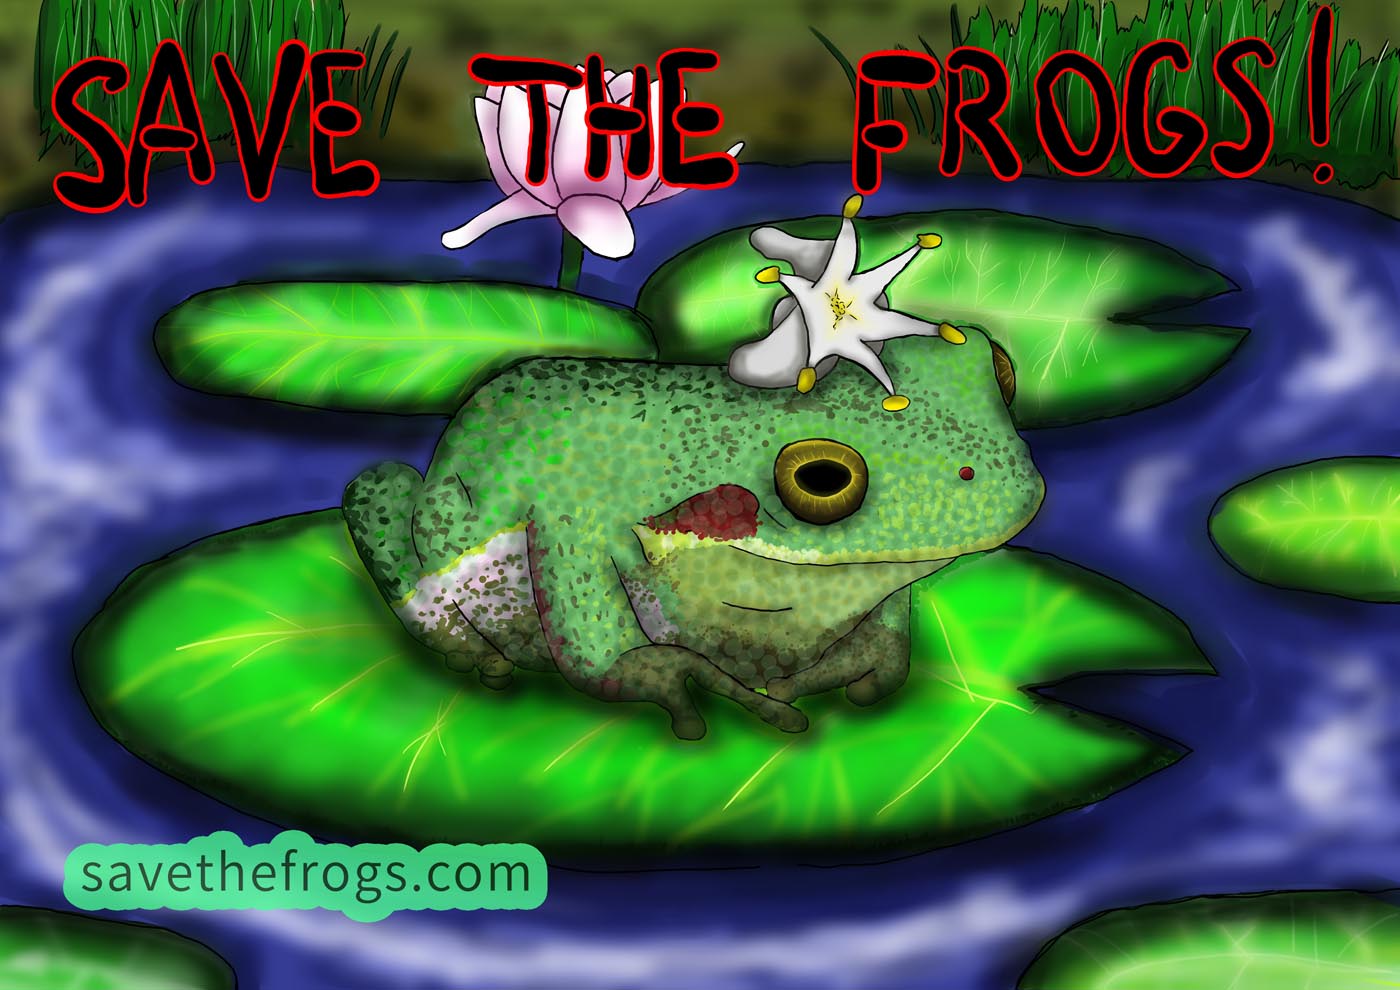 Diana-Novokreshina-Russia-2021-save-the-frogs-art-contest 5th Place Winner